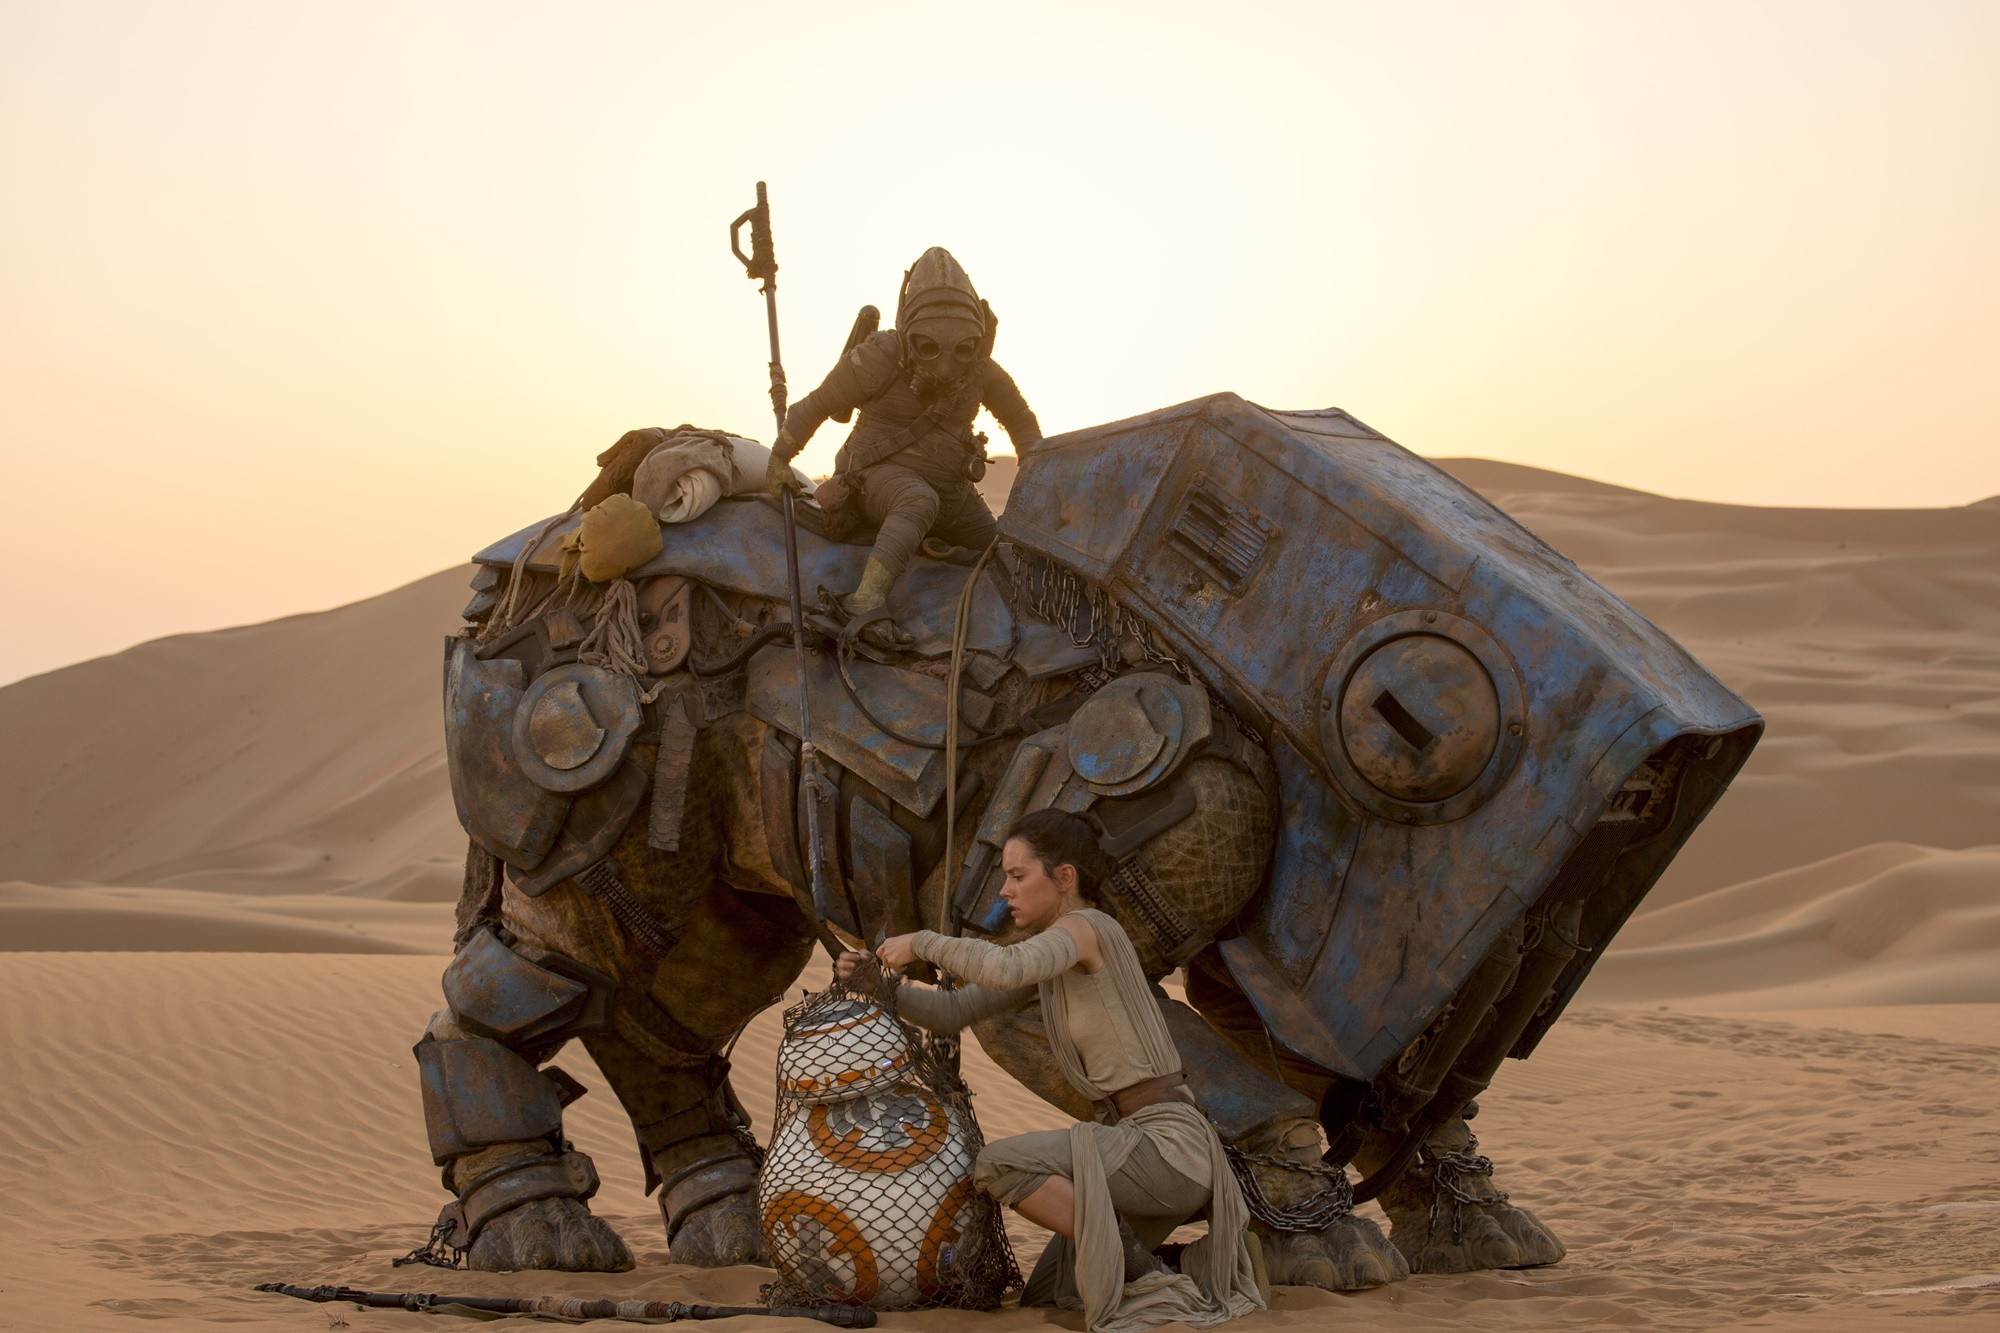 Daisy Ridley stars as Rey in Walt Disney Pictures' Star Wars: The Force Awakens (2015)